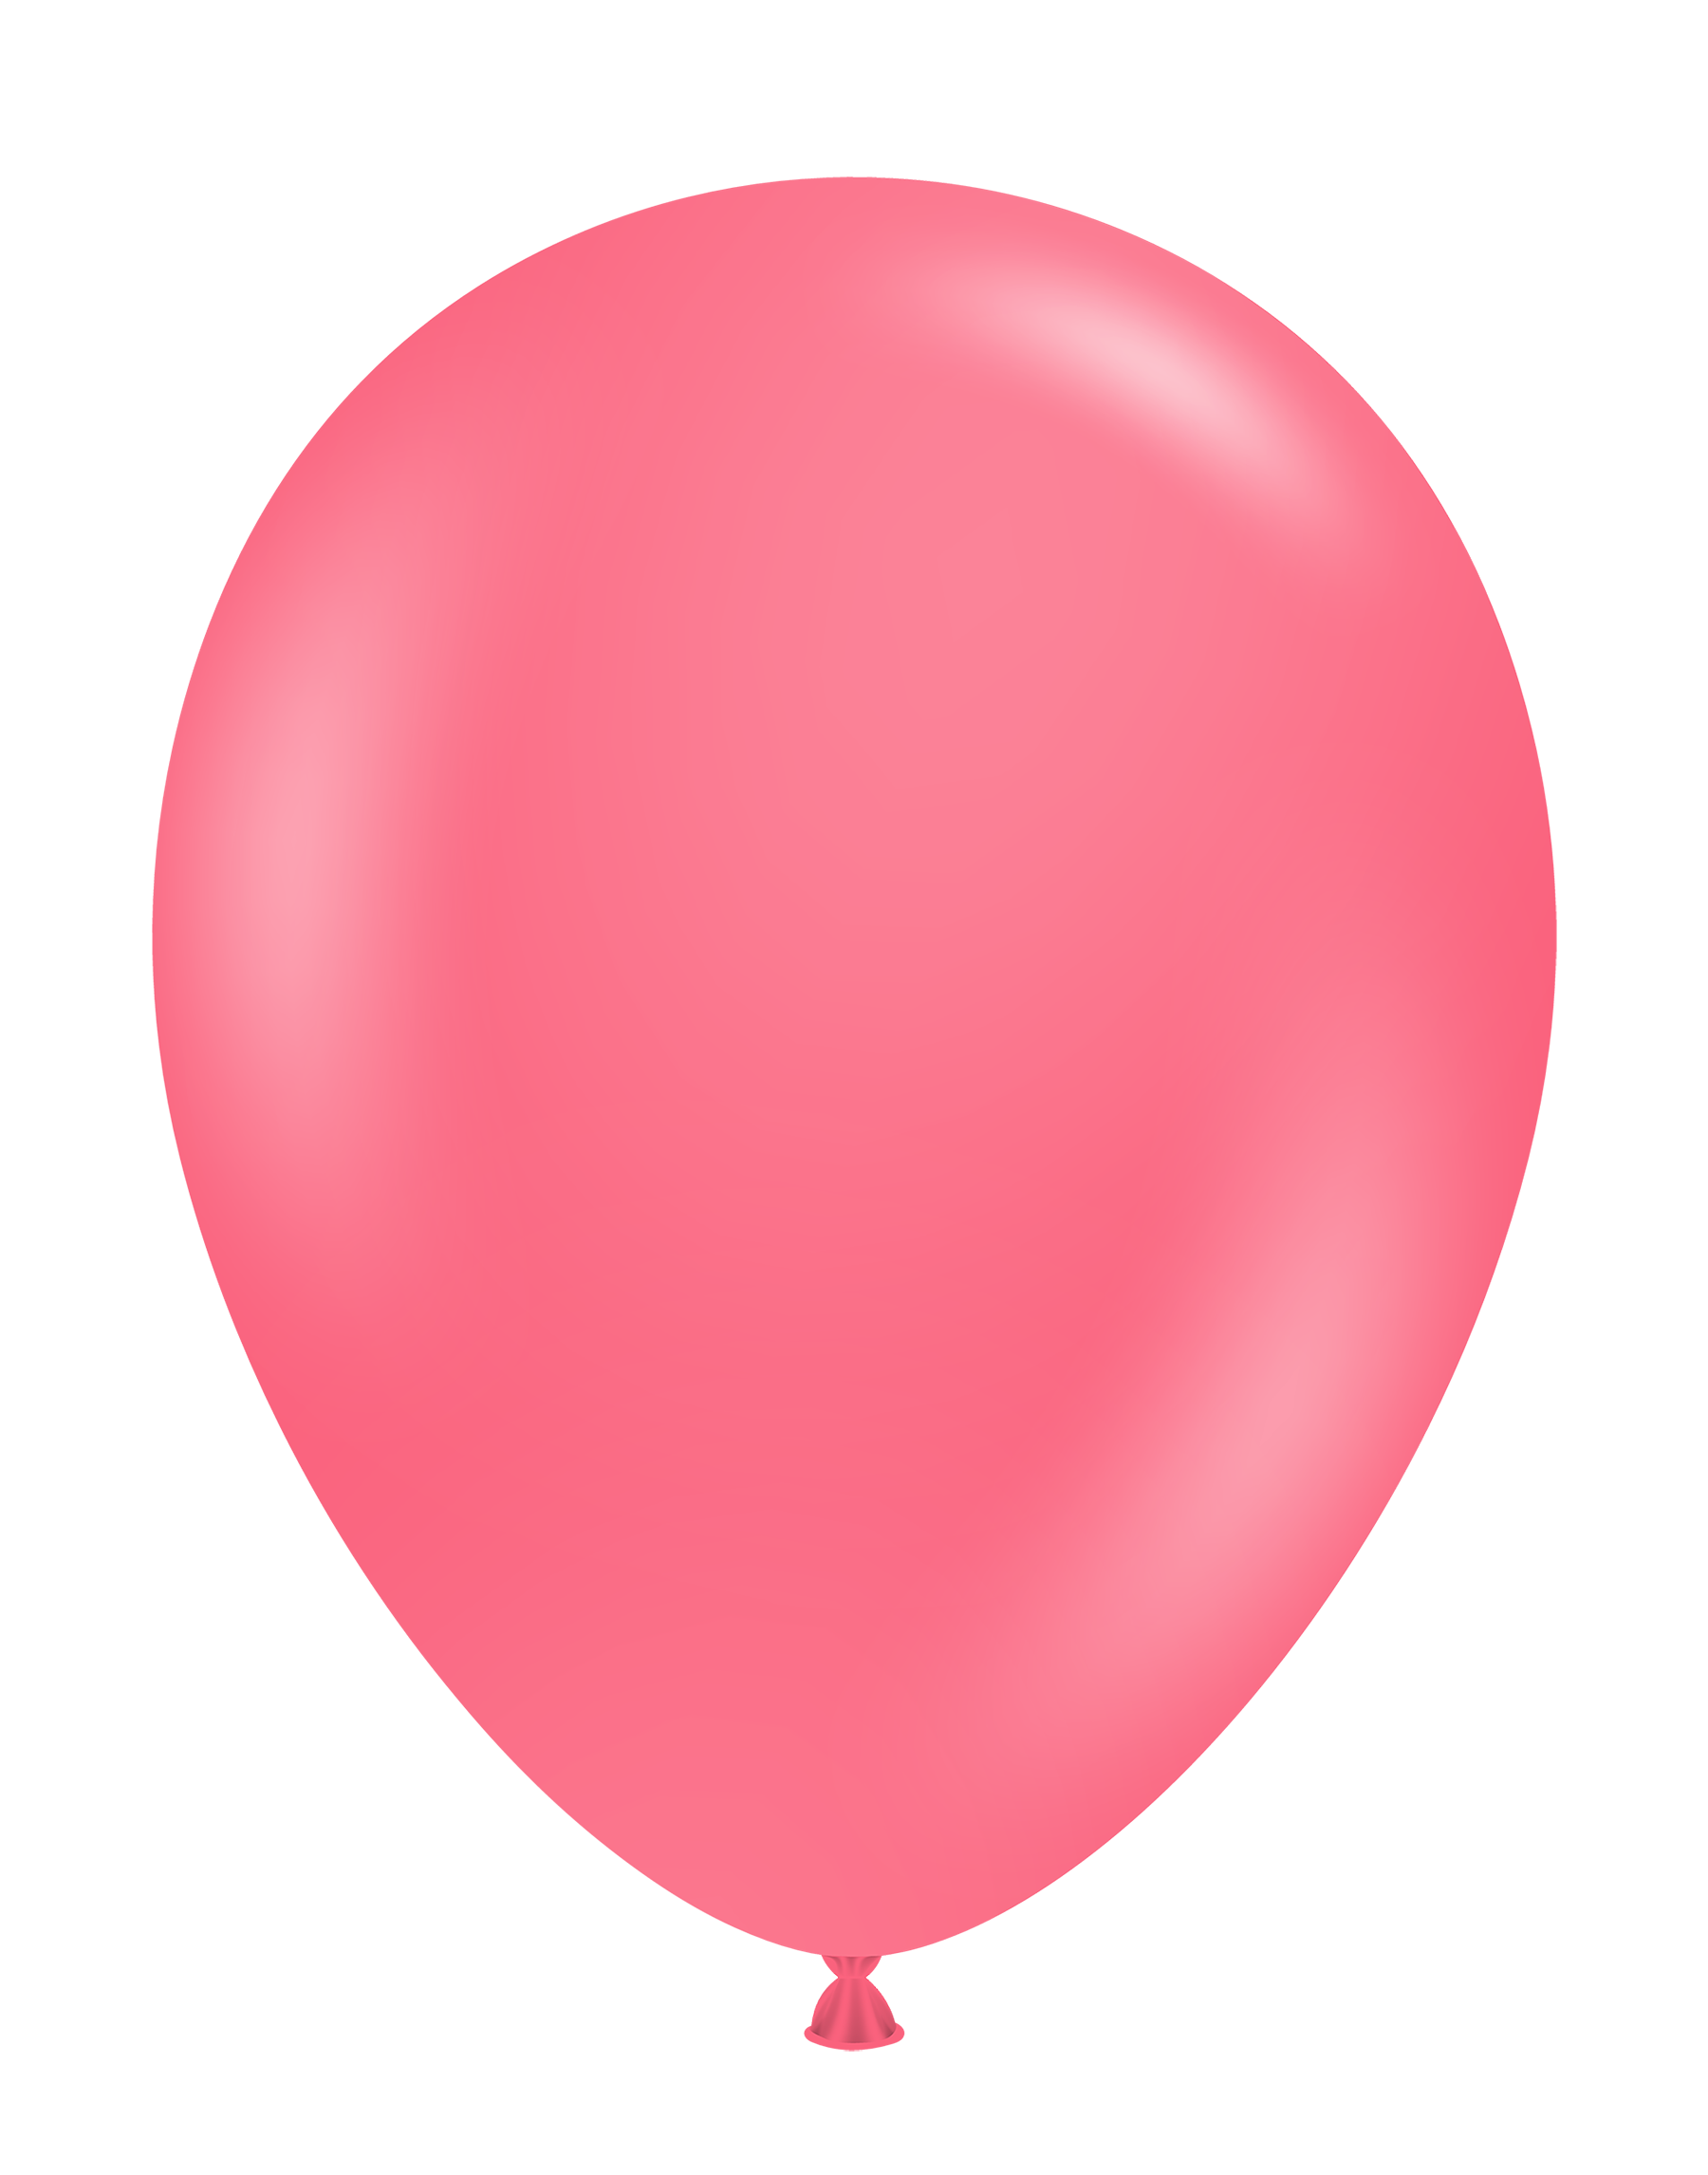 17" TUFTEX Taffy - Coral Pink Latex Balloons | 72 Count